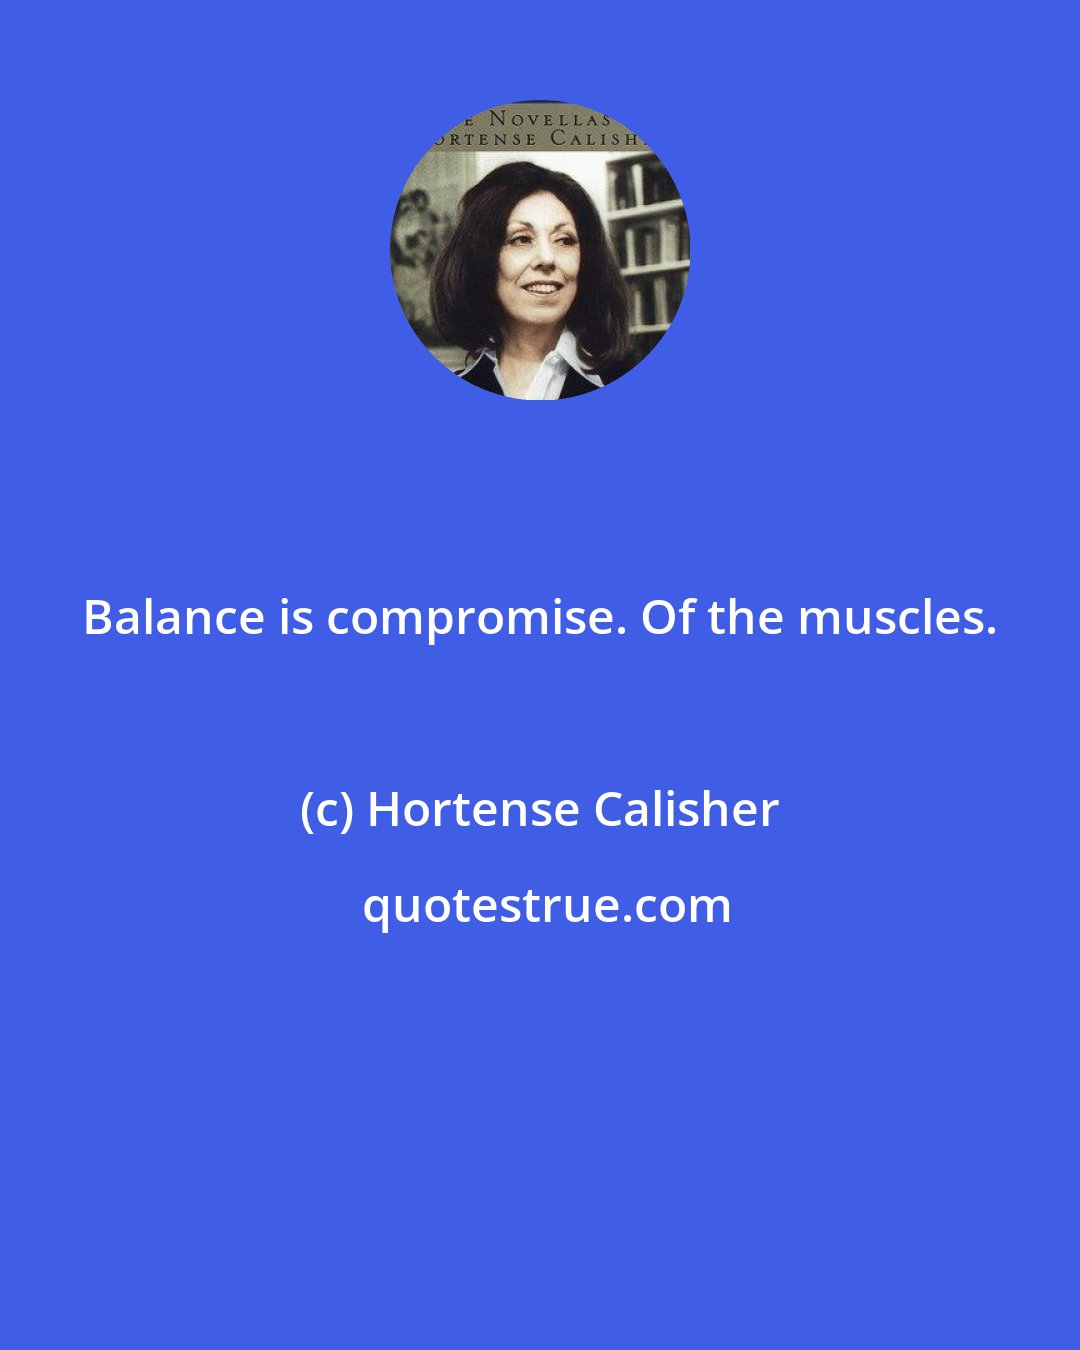 Hortense Calisher: Balance is compromise. Of the muscles.